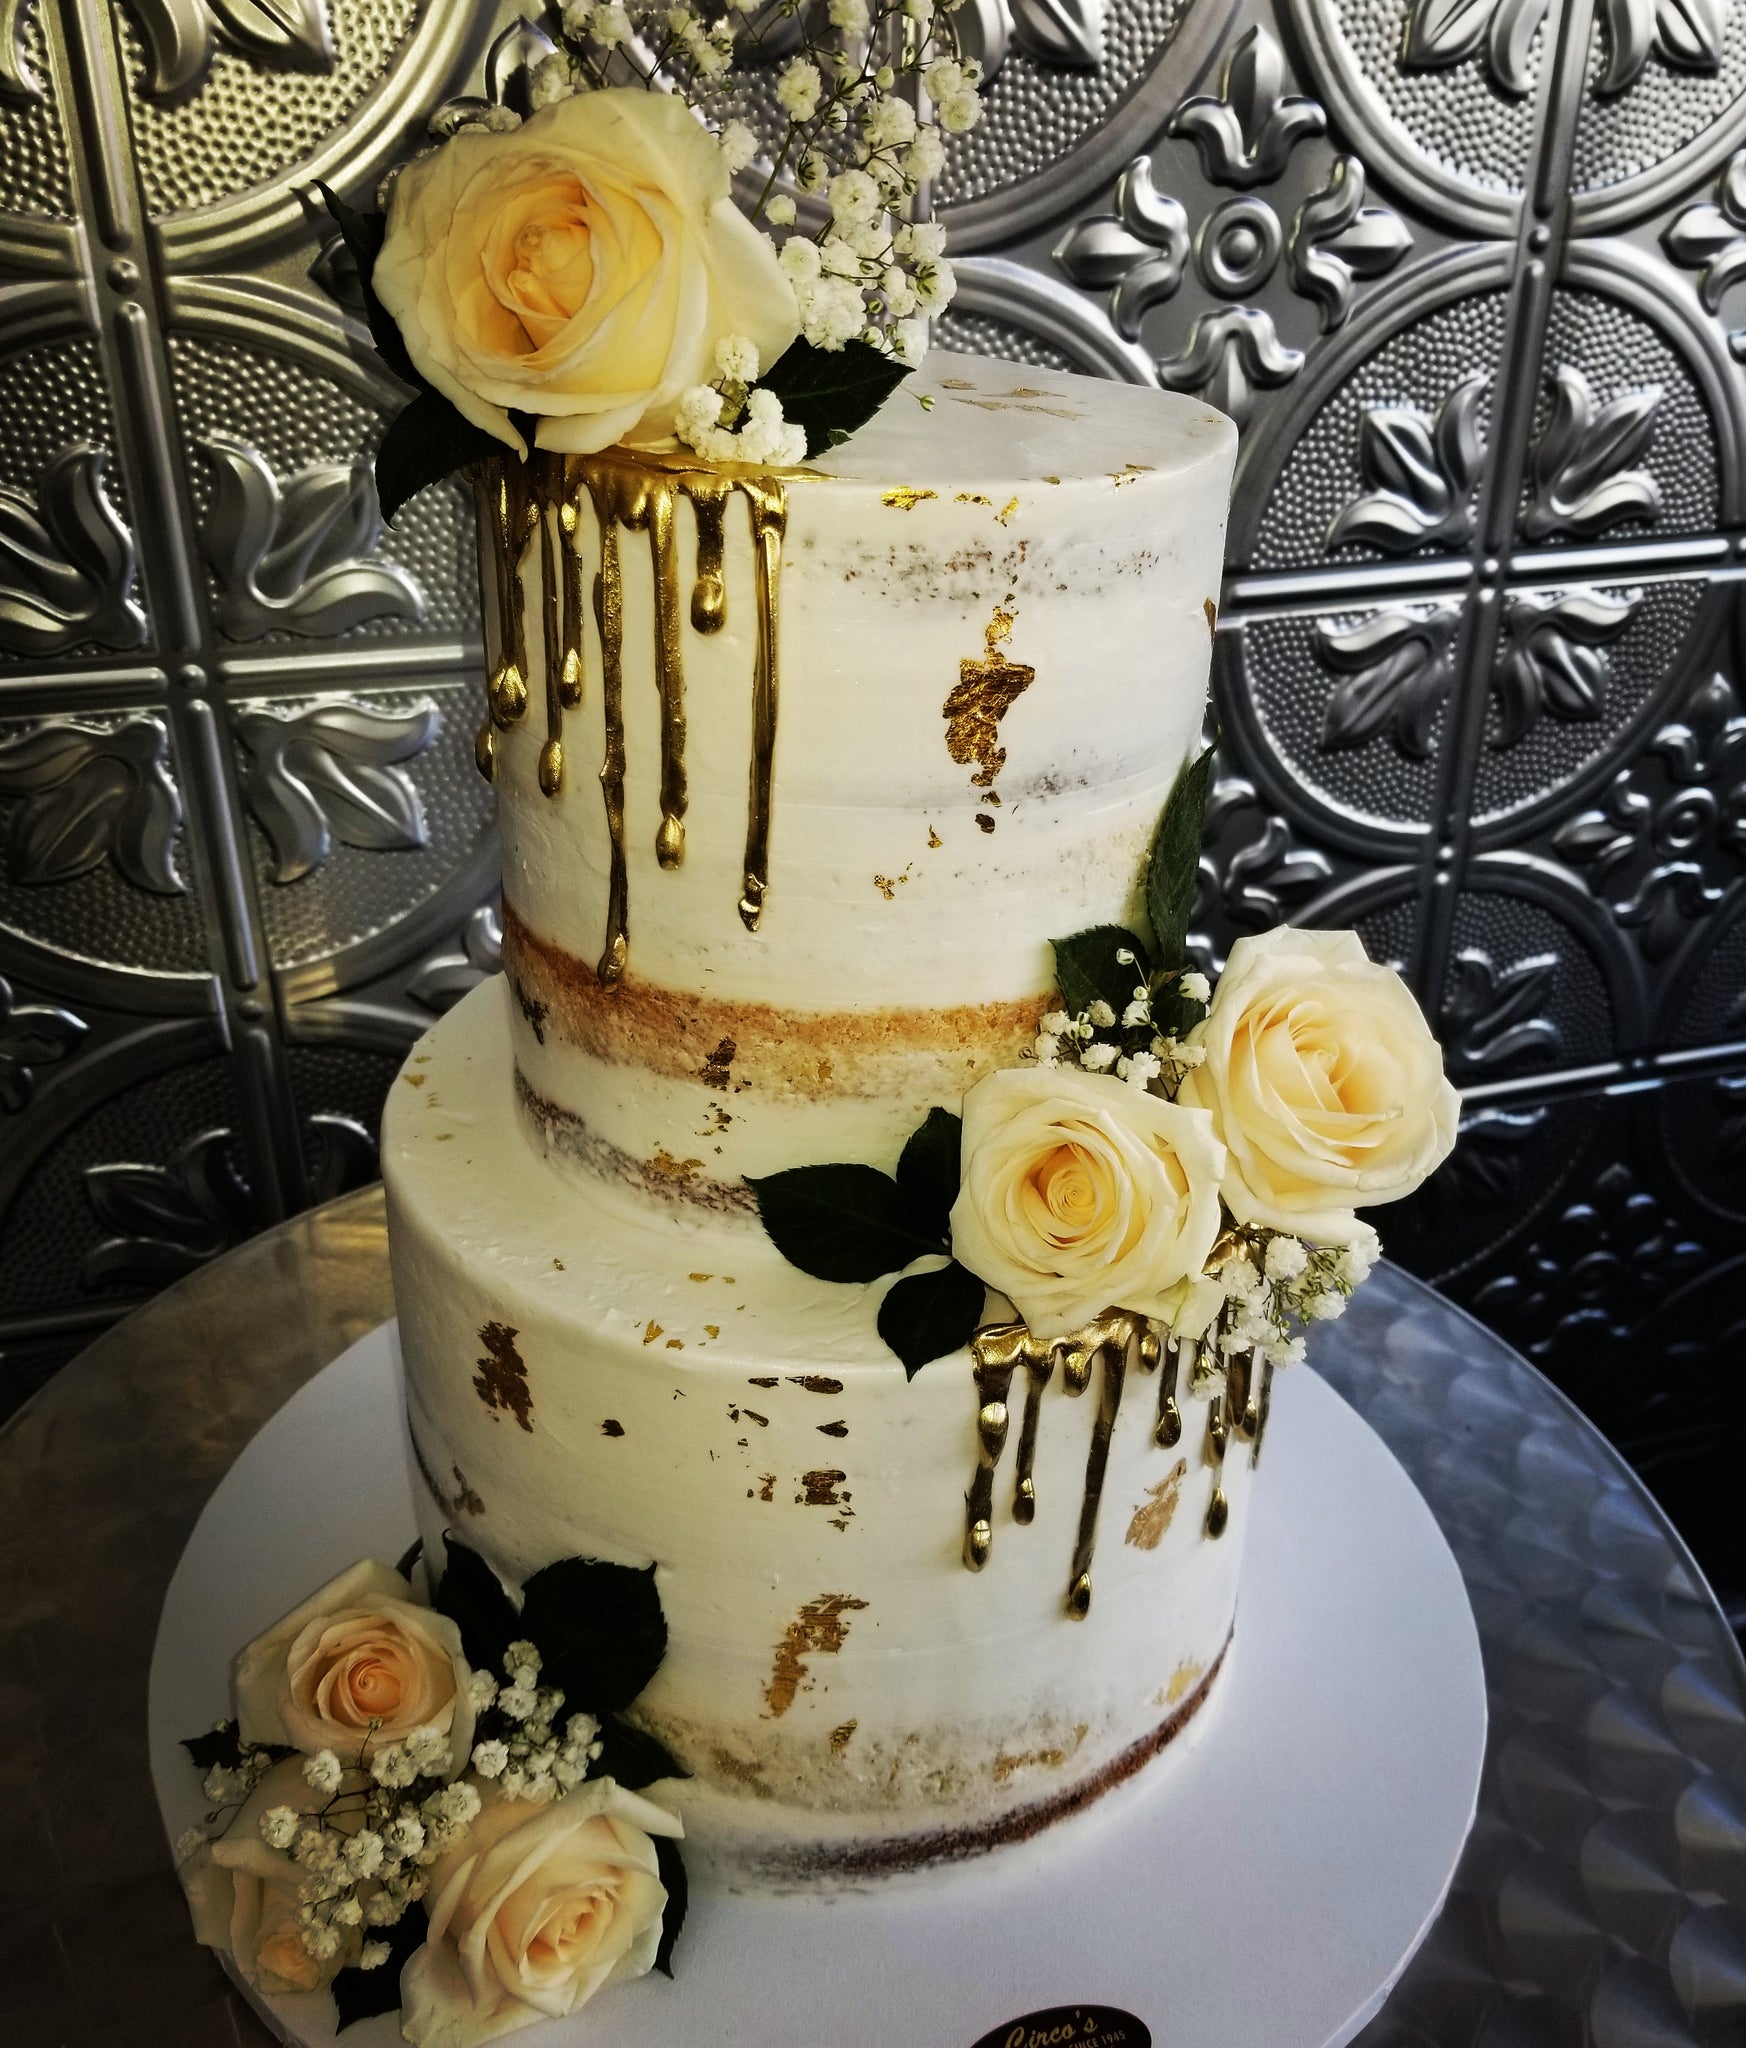 Three-tiered cake for wedding embellishments. | CanStock